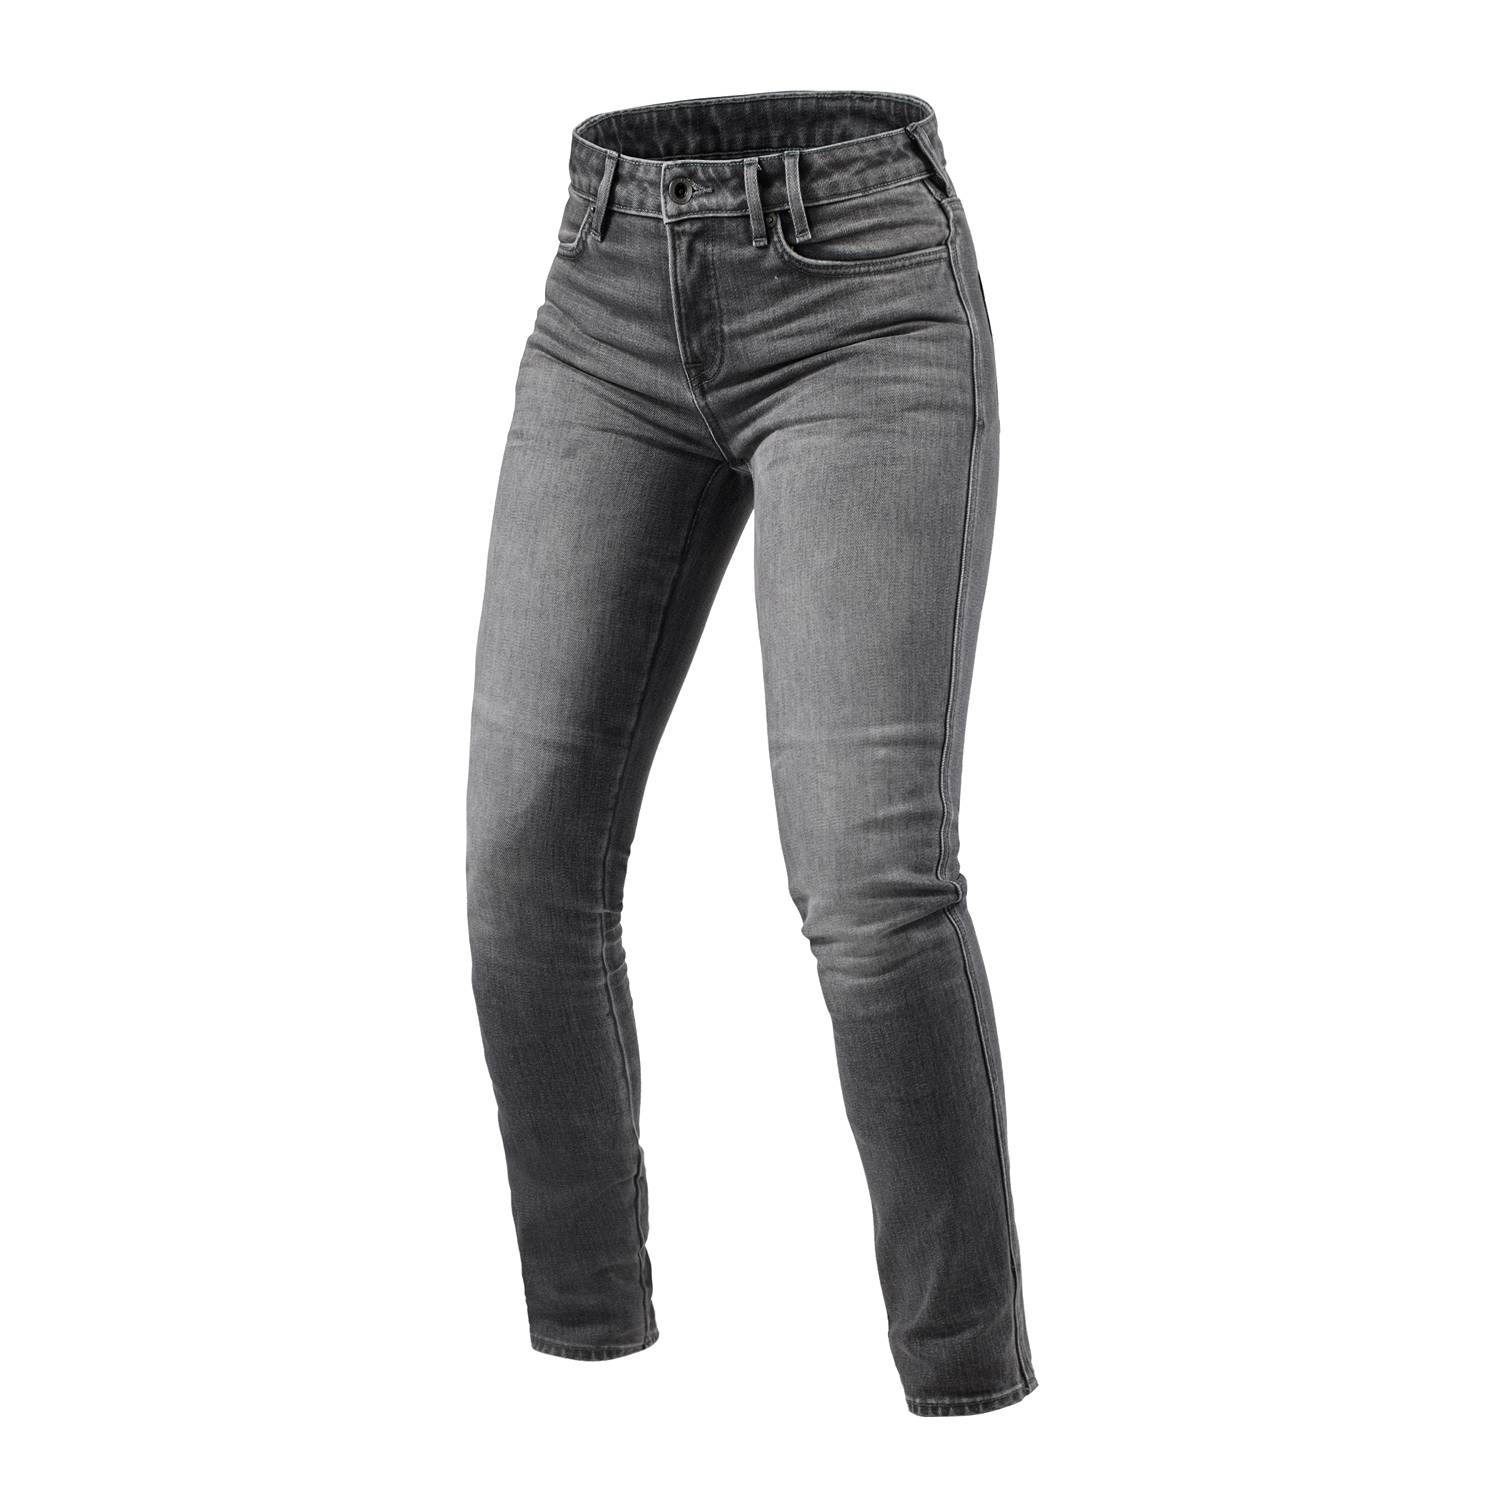 Image of REV'IT! Jeans Shelby 2 Ladies SK Medium Grey Stone L32 Taille L32/W28